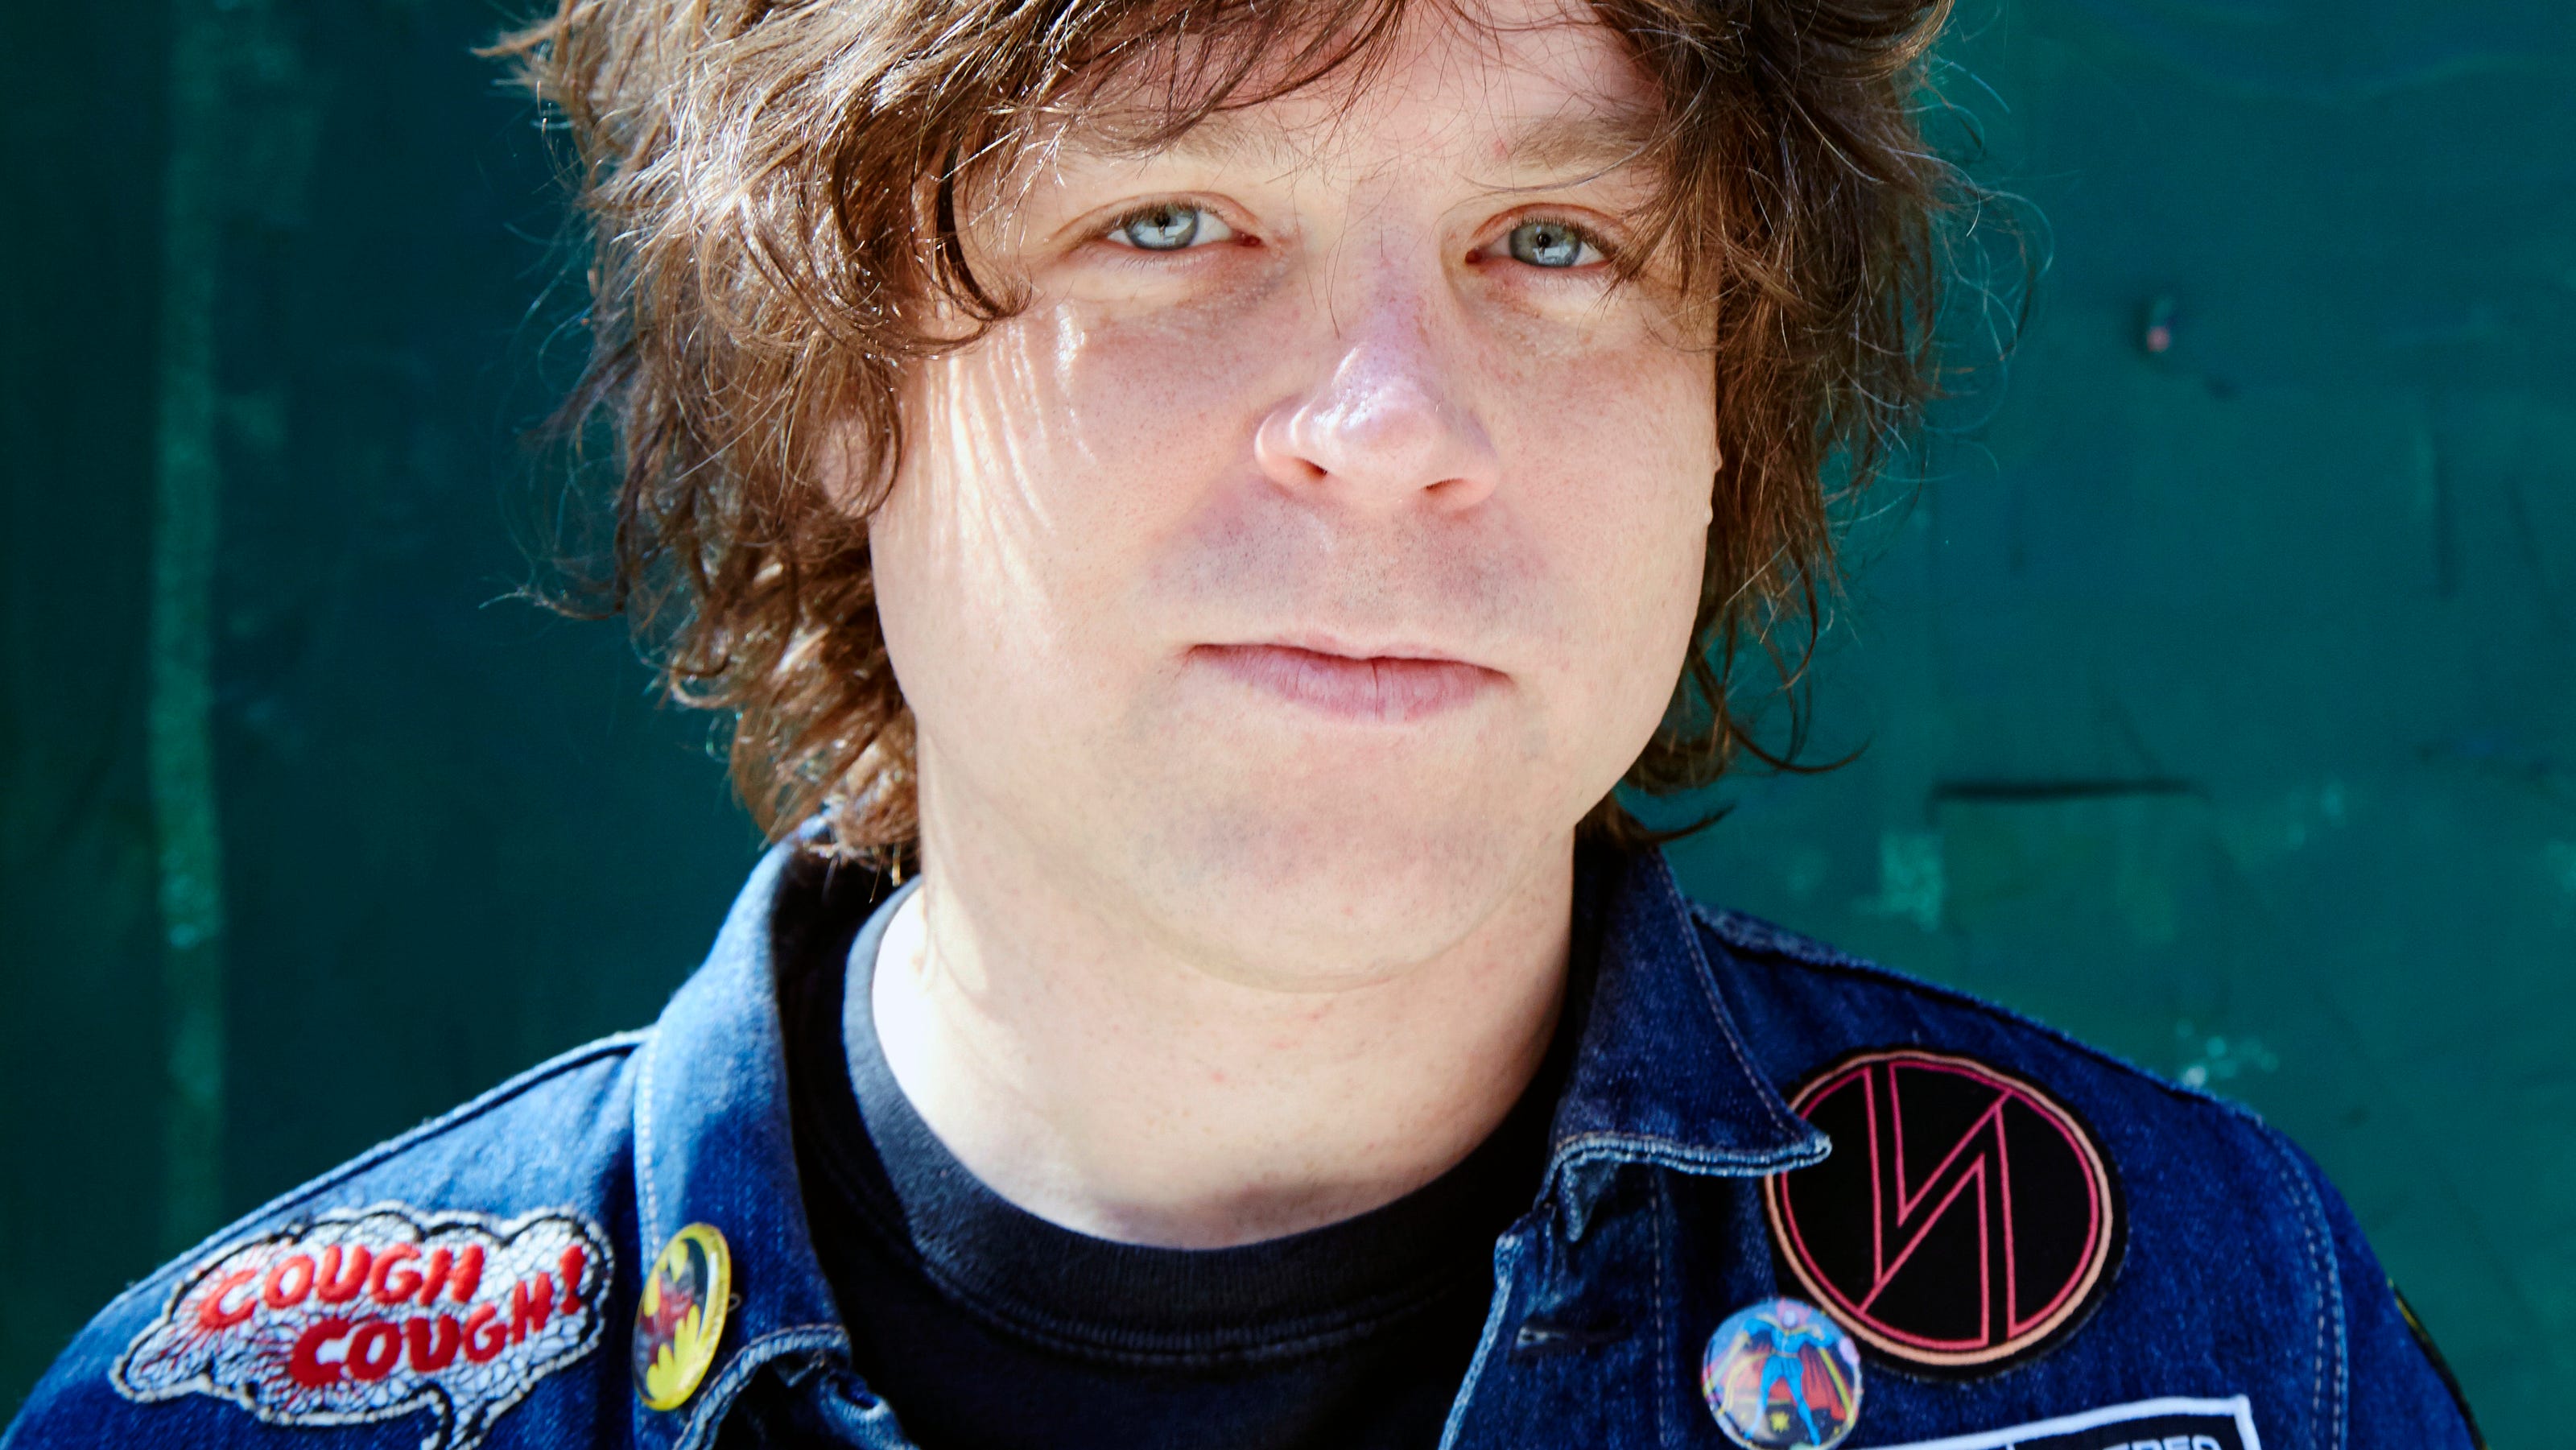 'I've mistreated people': Ryan Adams apologizes a year after sexual misconduct allegations - USA TODAY